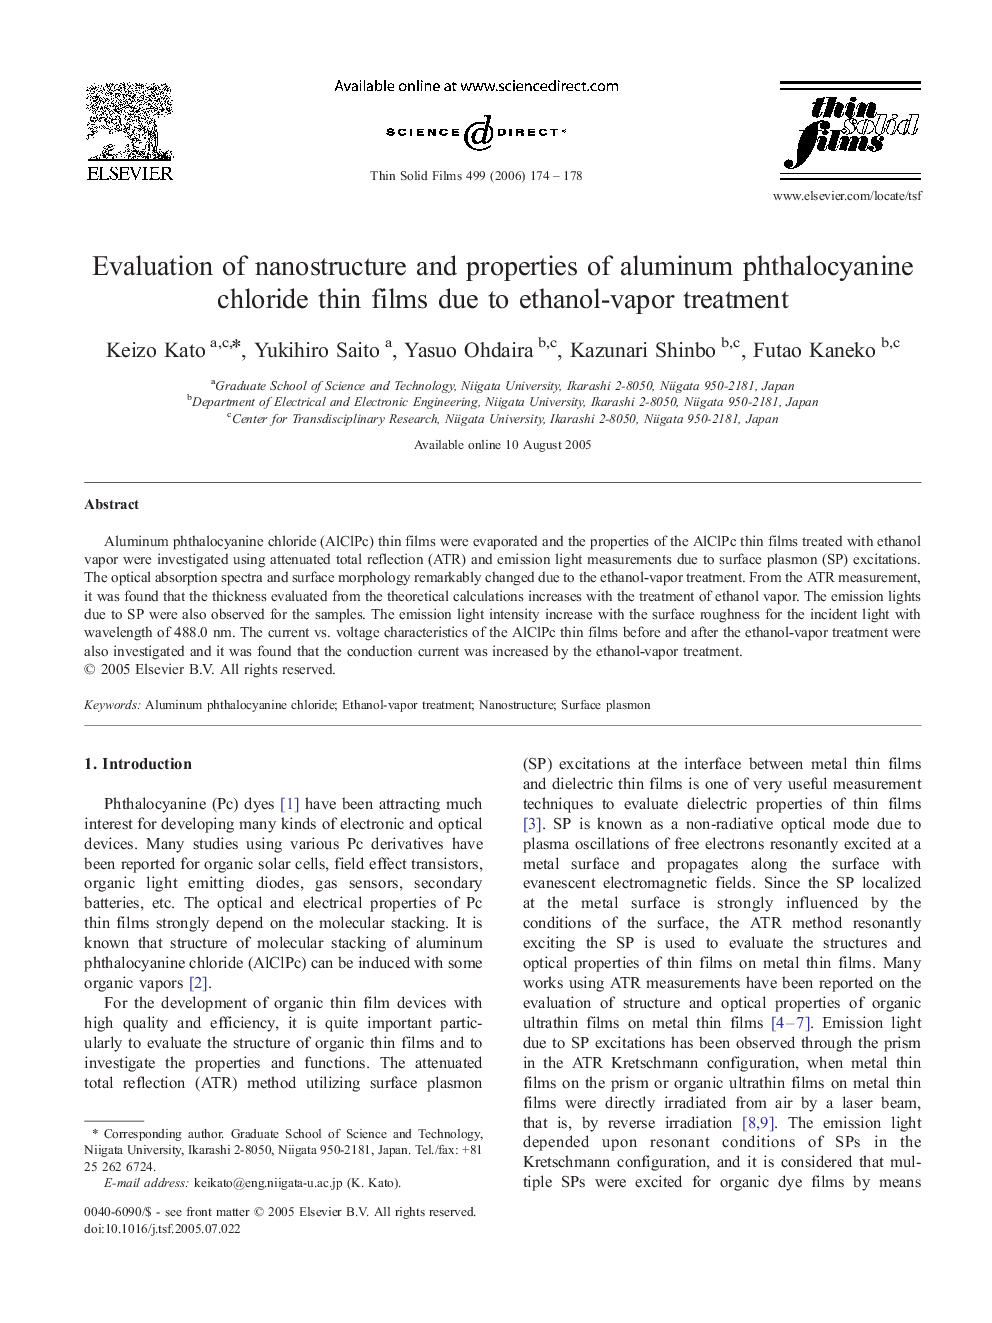 Evaluation of nanostructure and properties of aluminum phthalocyanine chloride thin films due to ethanol-vapor treatment